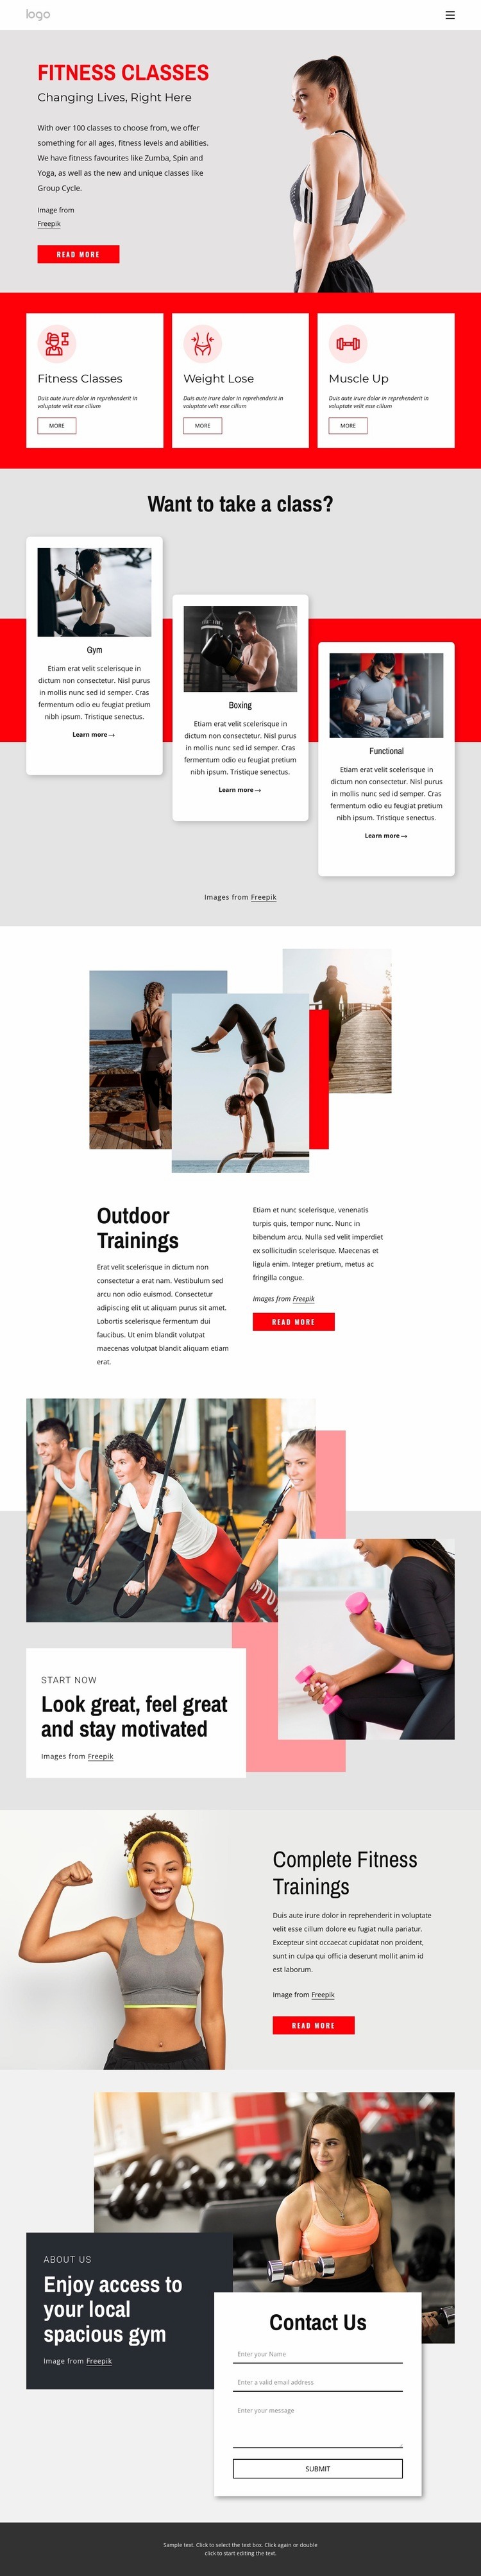 Full-spectrum fitness gym Web Page Design